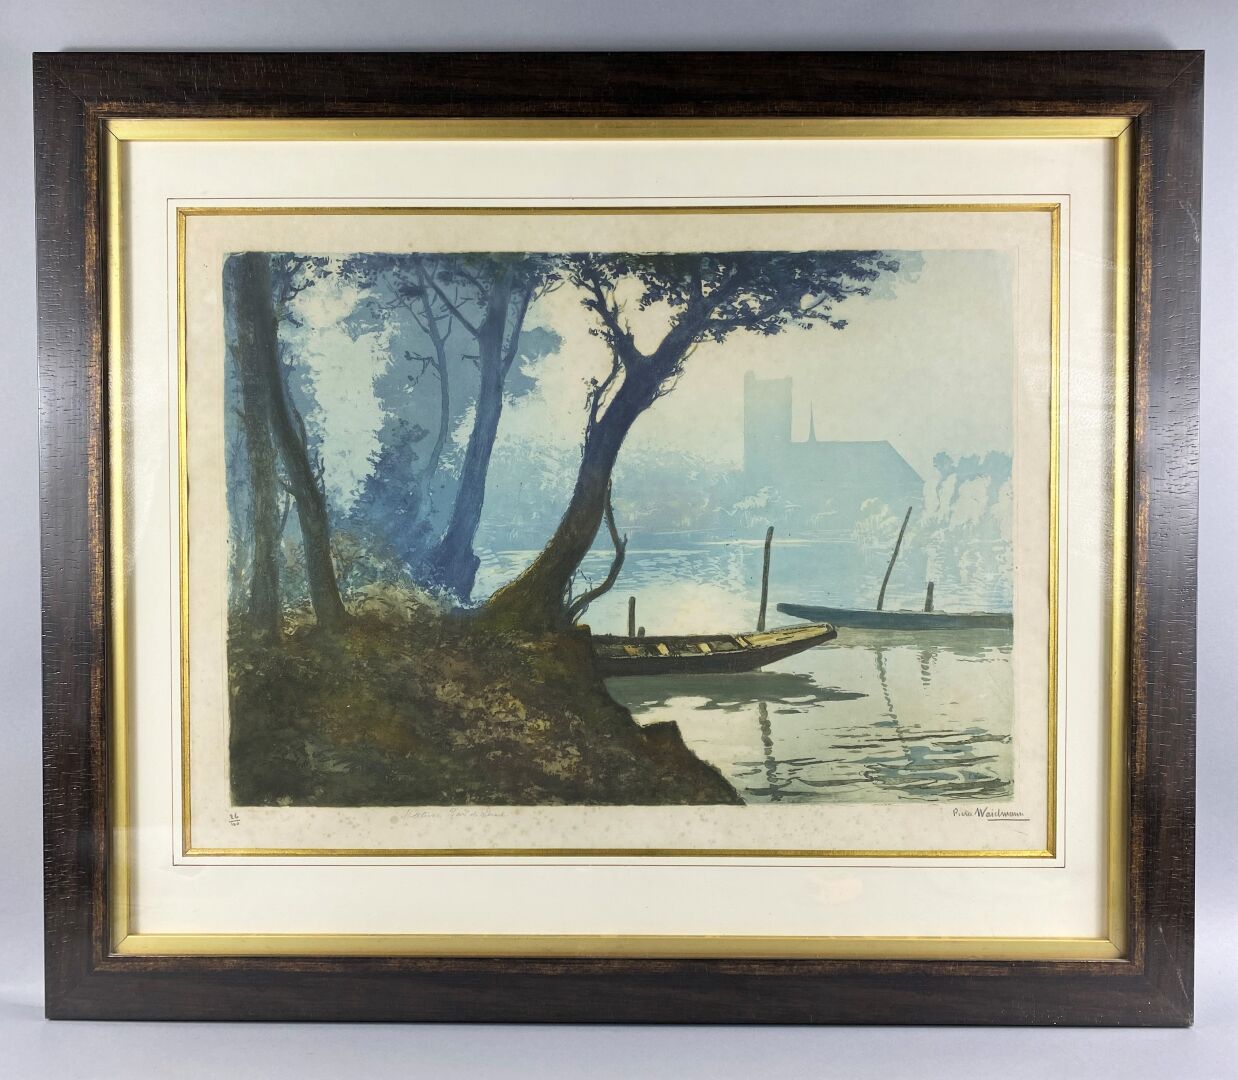 Null Pierre Waidmann (1860-1937),

Morning on the banks of the Seine.

Lithograp&hellip;